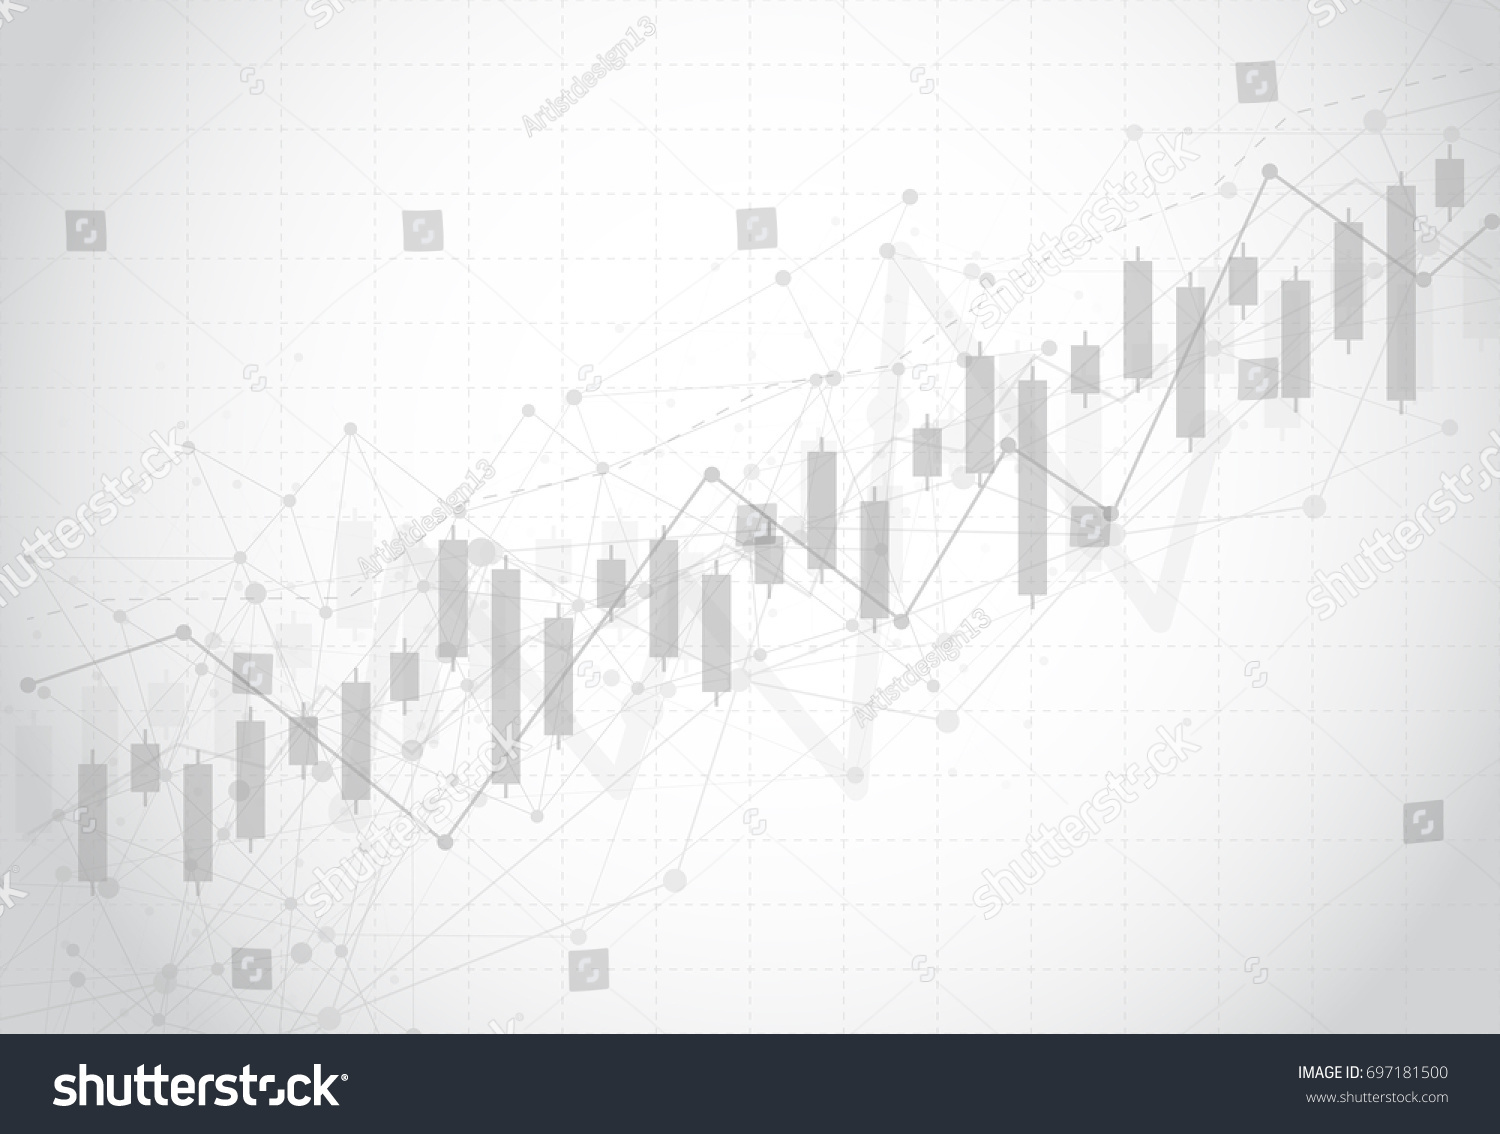 SVG of Business candle stick graph chart of stock market investment trading on dark background design. Bullish point, Trend of graph. Vector illustration svg